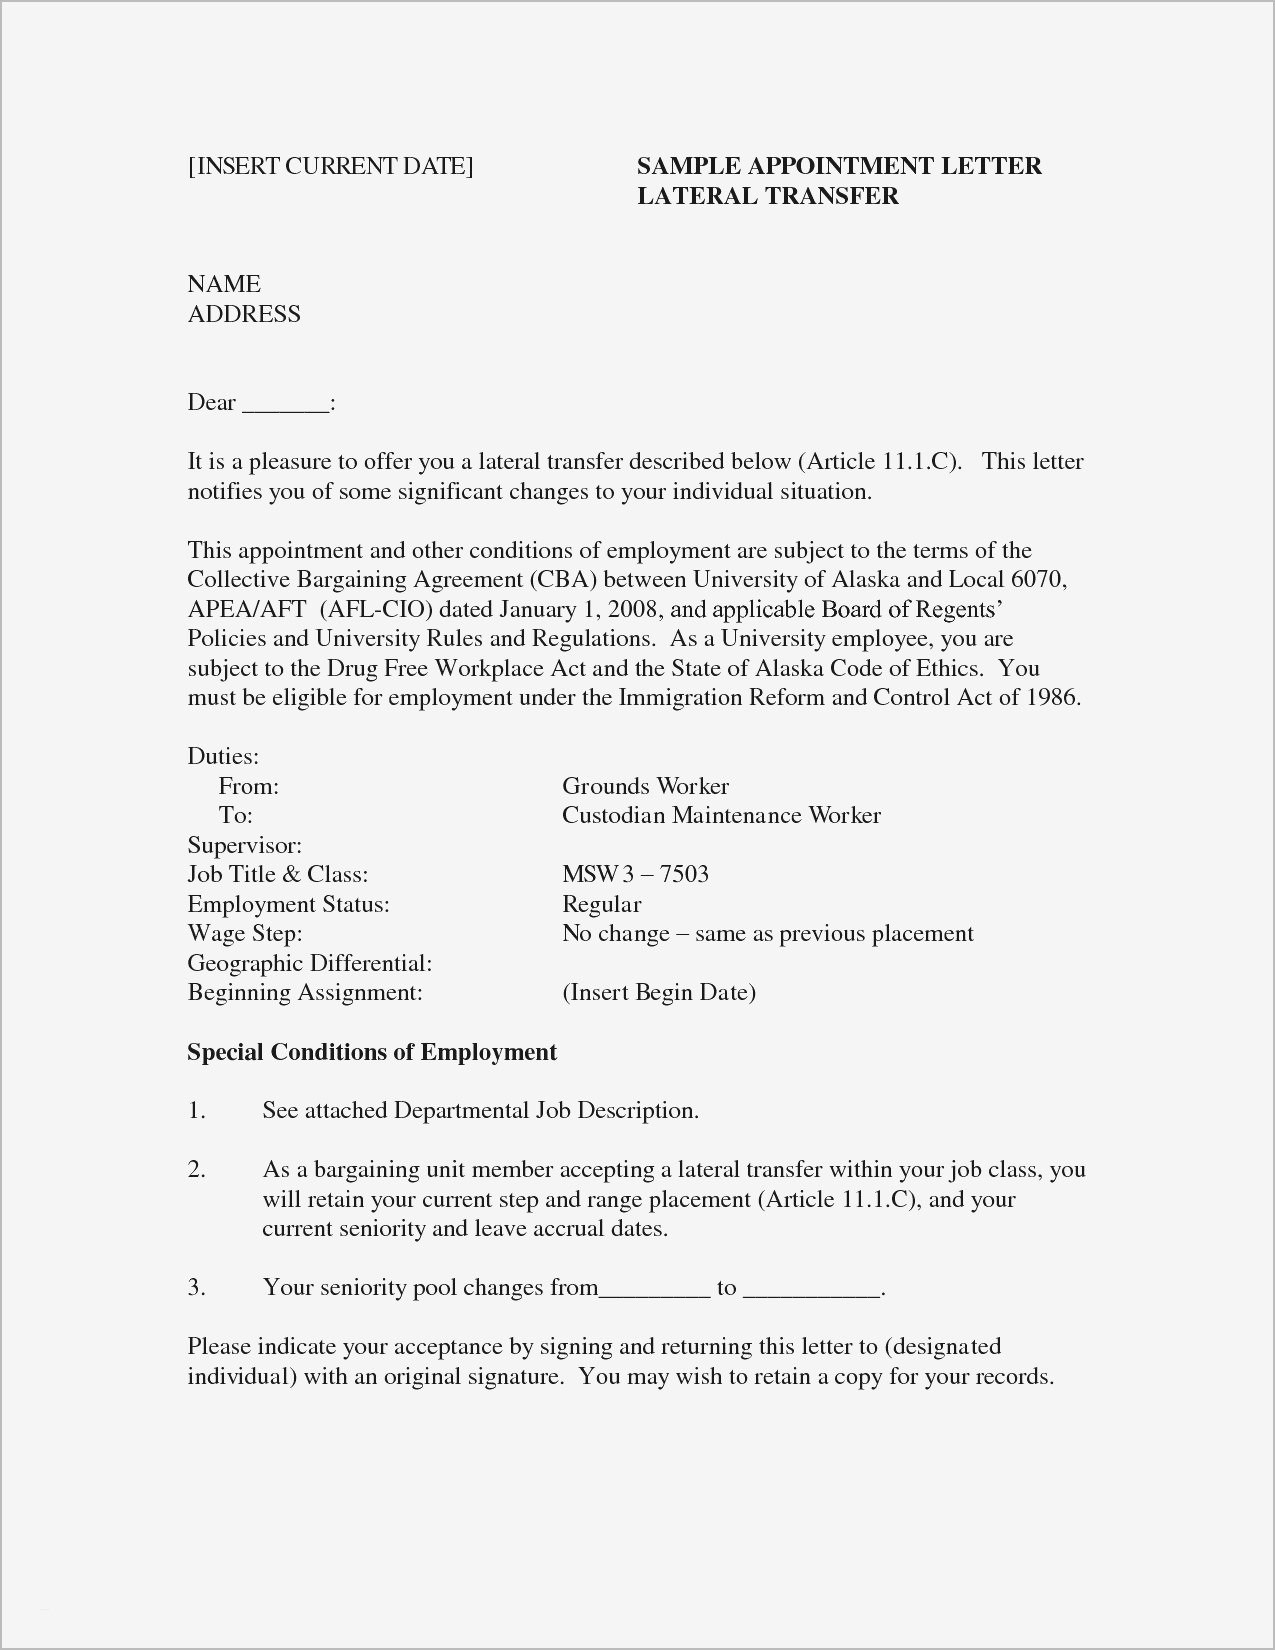 Employee Relocation Letter Template Examples | Letter ...